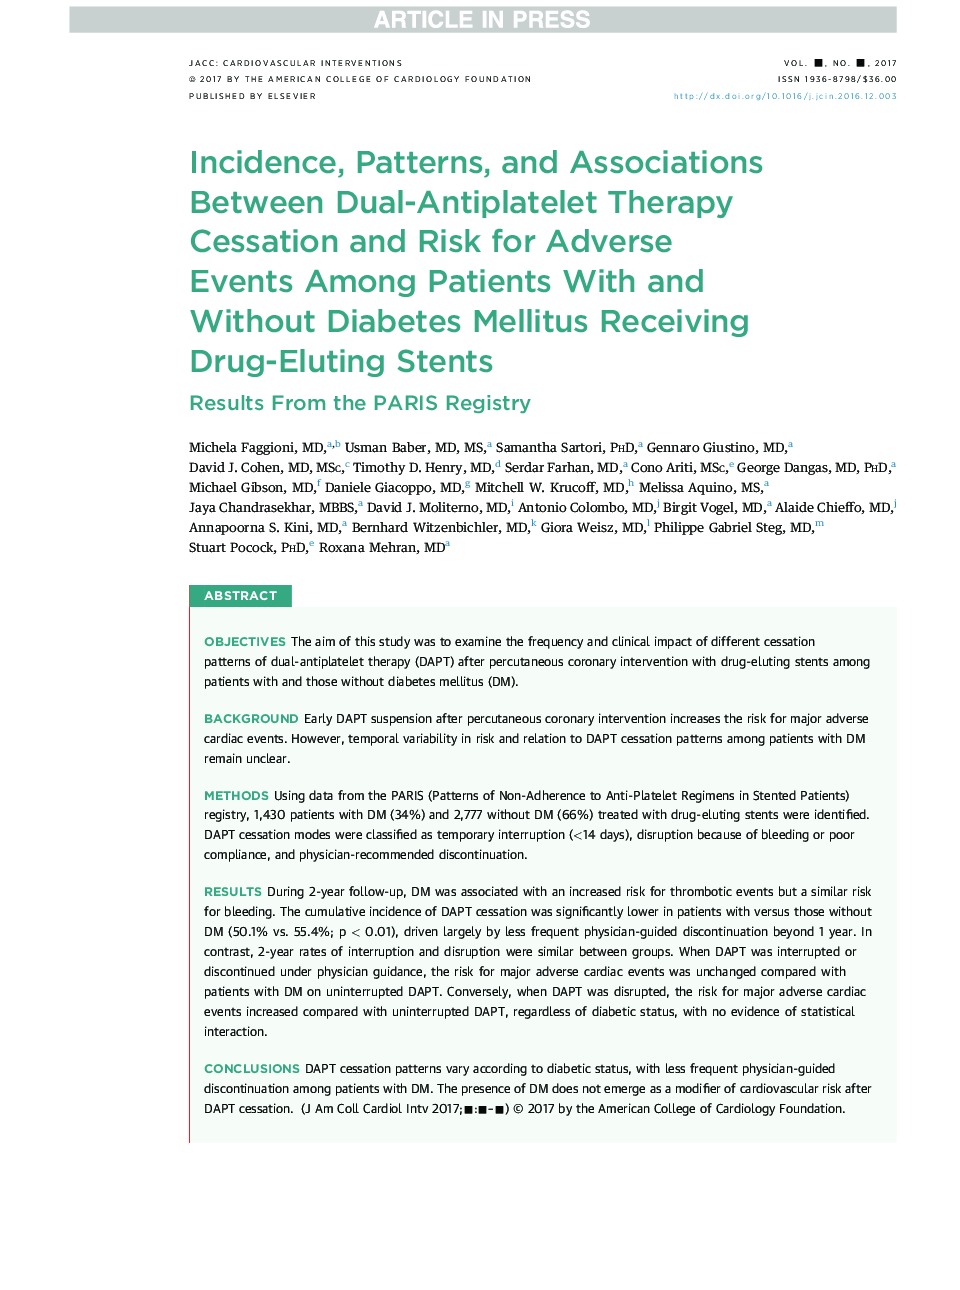 Incidence, Patterns, and Associations Between Dual-Antiplatelet Therapy Cessation and RiskÂ for Adverse EventsÂ Among Patients With and WithoutÂ Diabetes Mellitus Receiving Drug-Eluting Stents